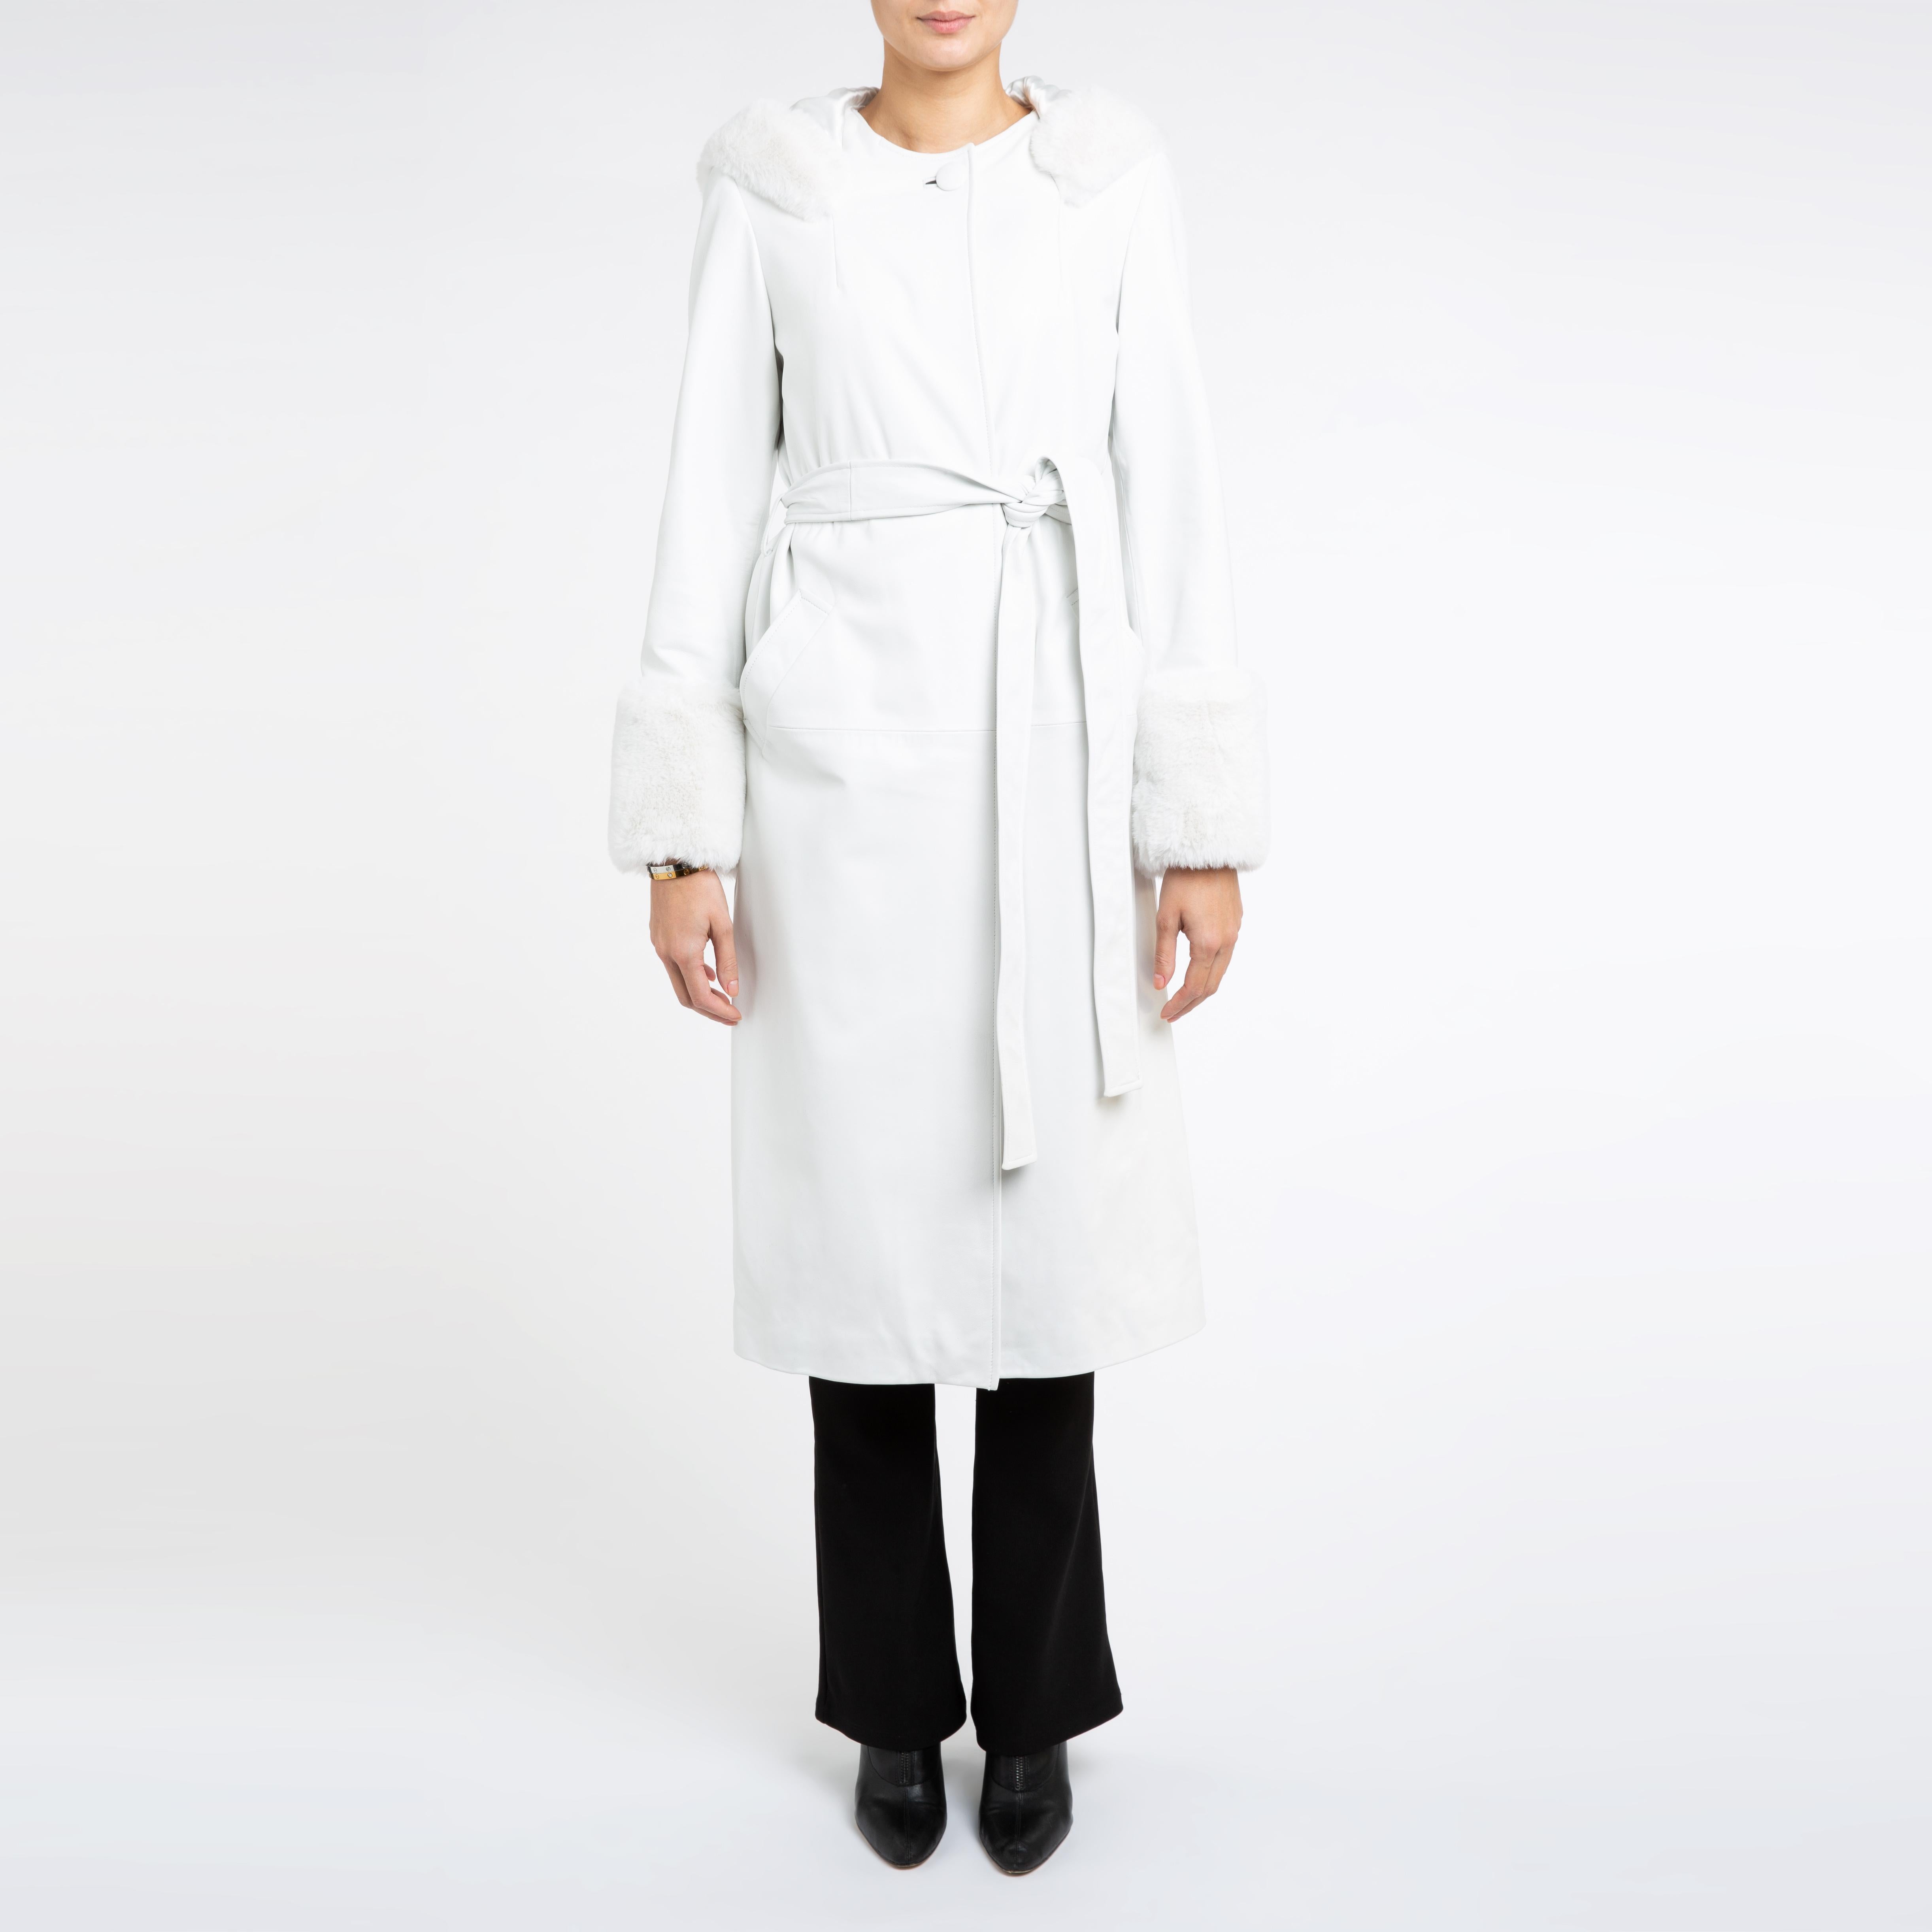 Verheyen Aurora Hooded Leather Trench Coat in White with Faux Fur - Size uk 10 In New Condition For Sale In London, GB